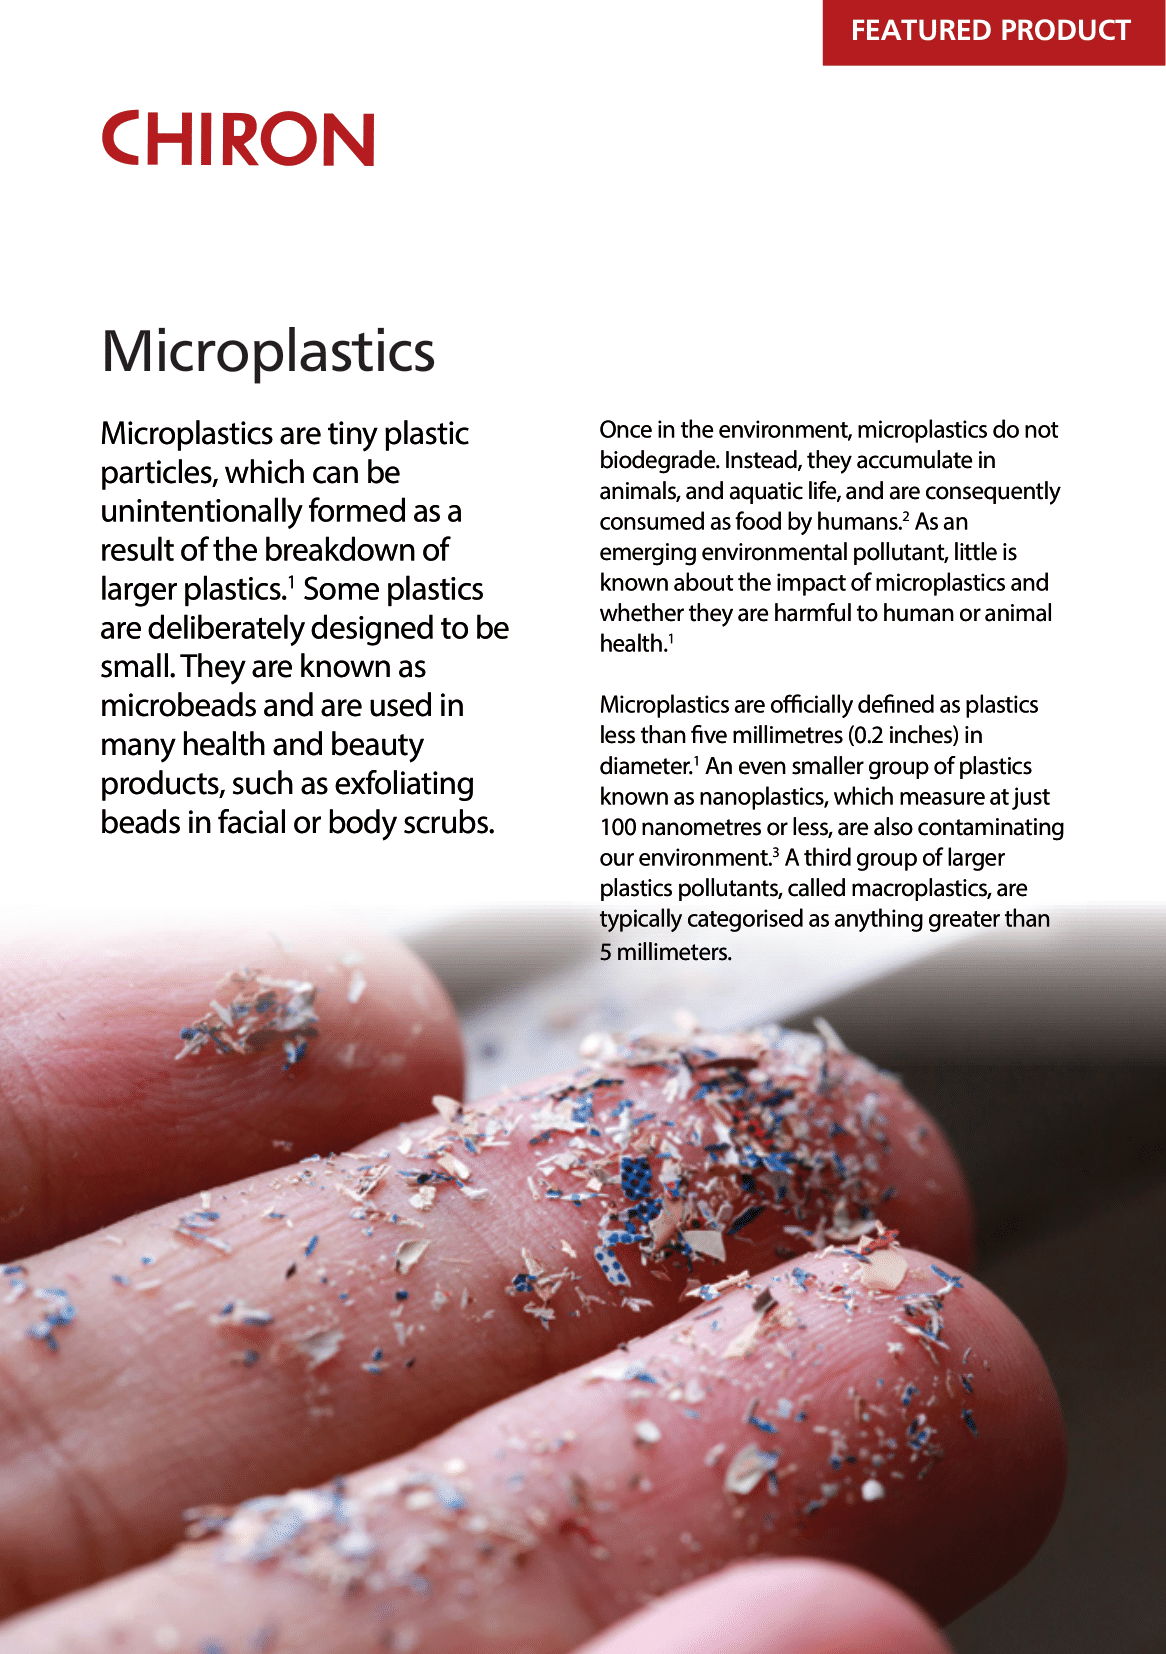 Featured product: Microplastics